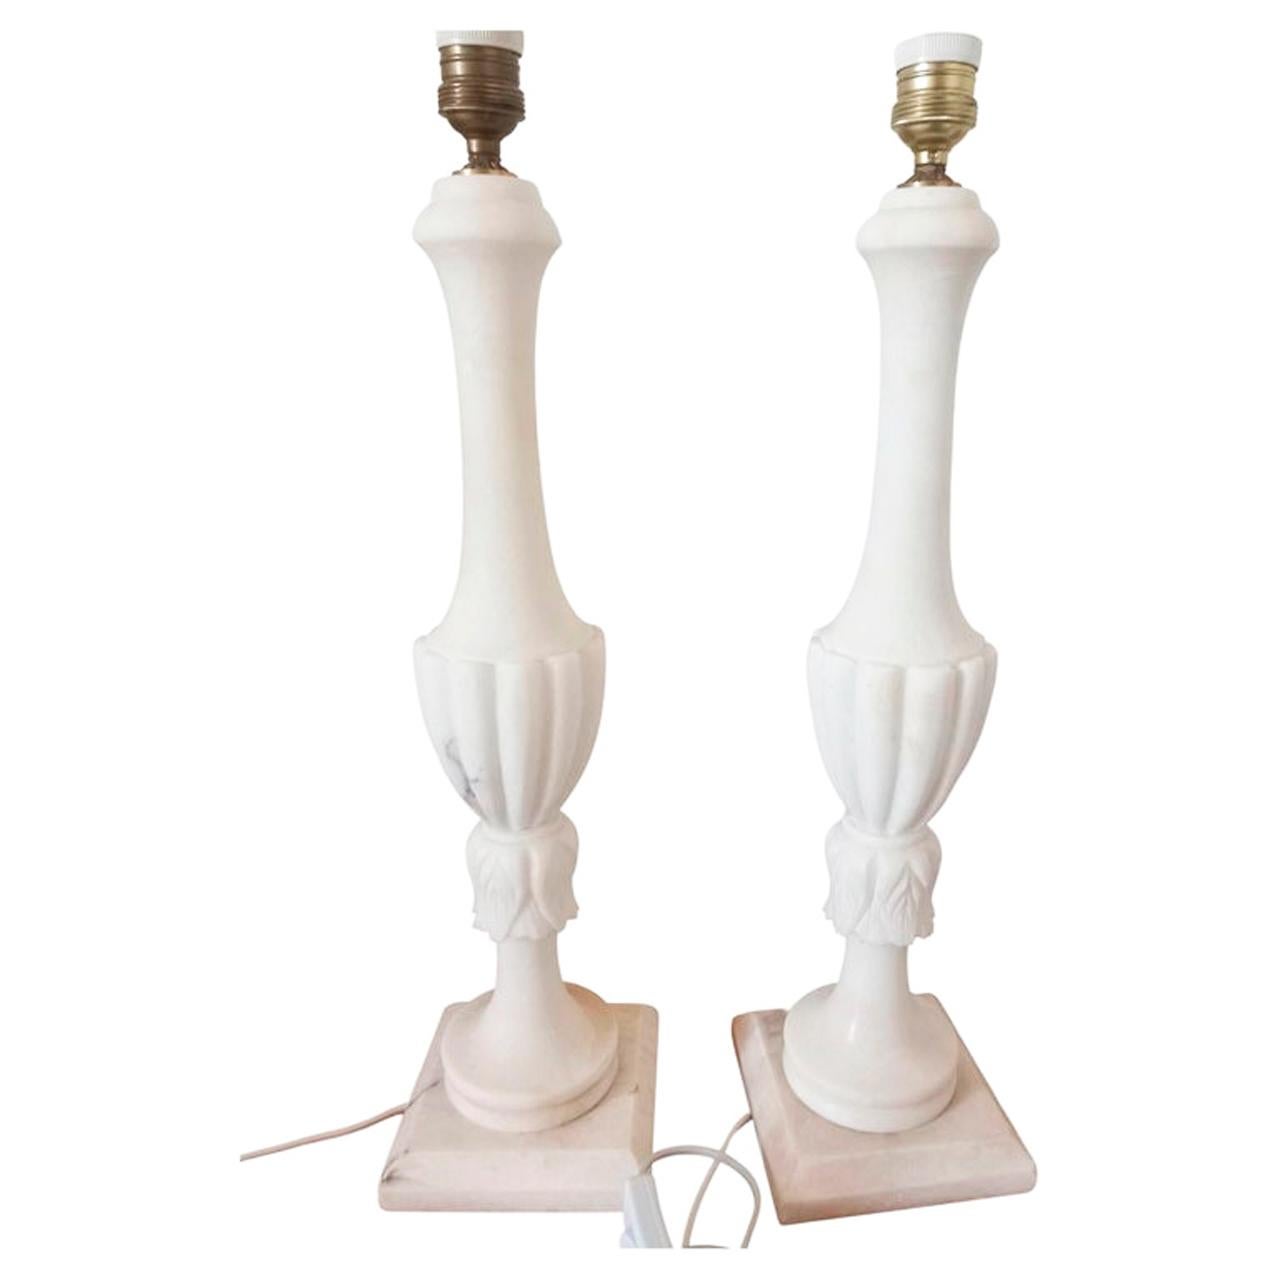  Extra Large Alabaster or Mrble Table Lamps  White Color 57 cm (without screens) For Sale 7